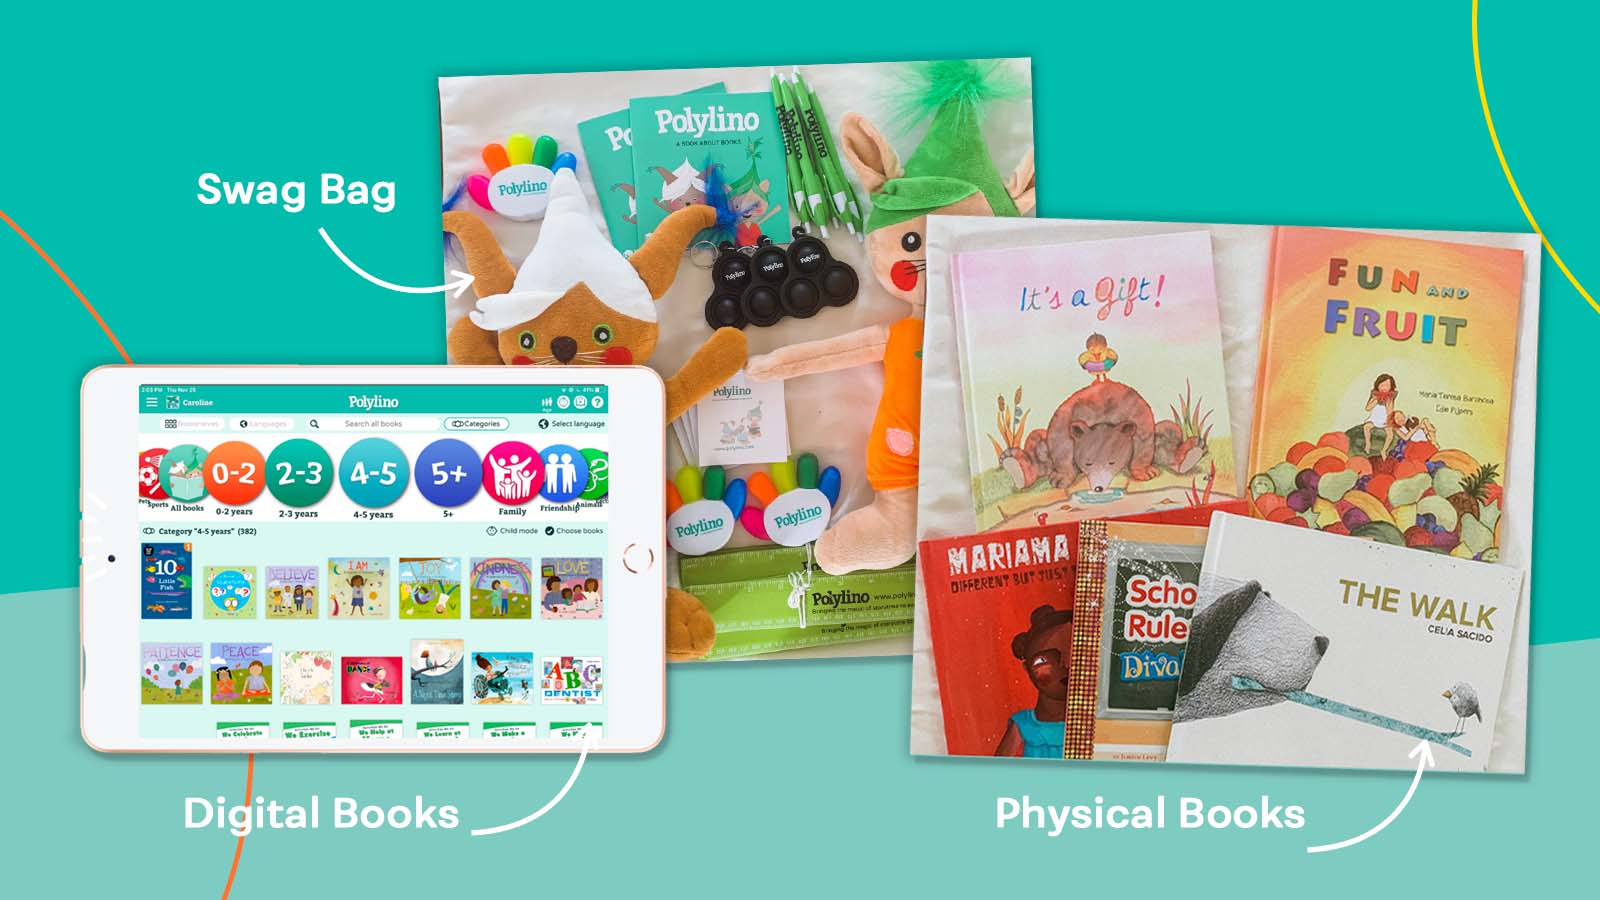 Teachers, Here's Your Chance To Win an Incredible Collection of Multilingual Books for Pre-K-2 Worth $1,300